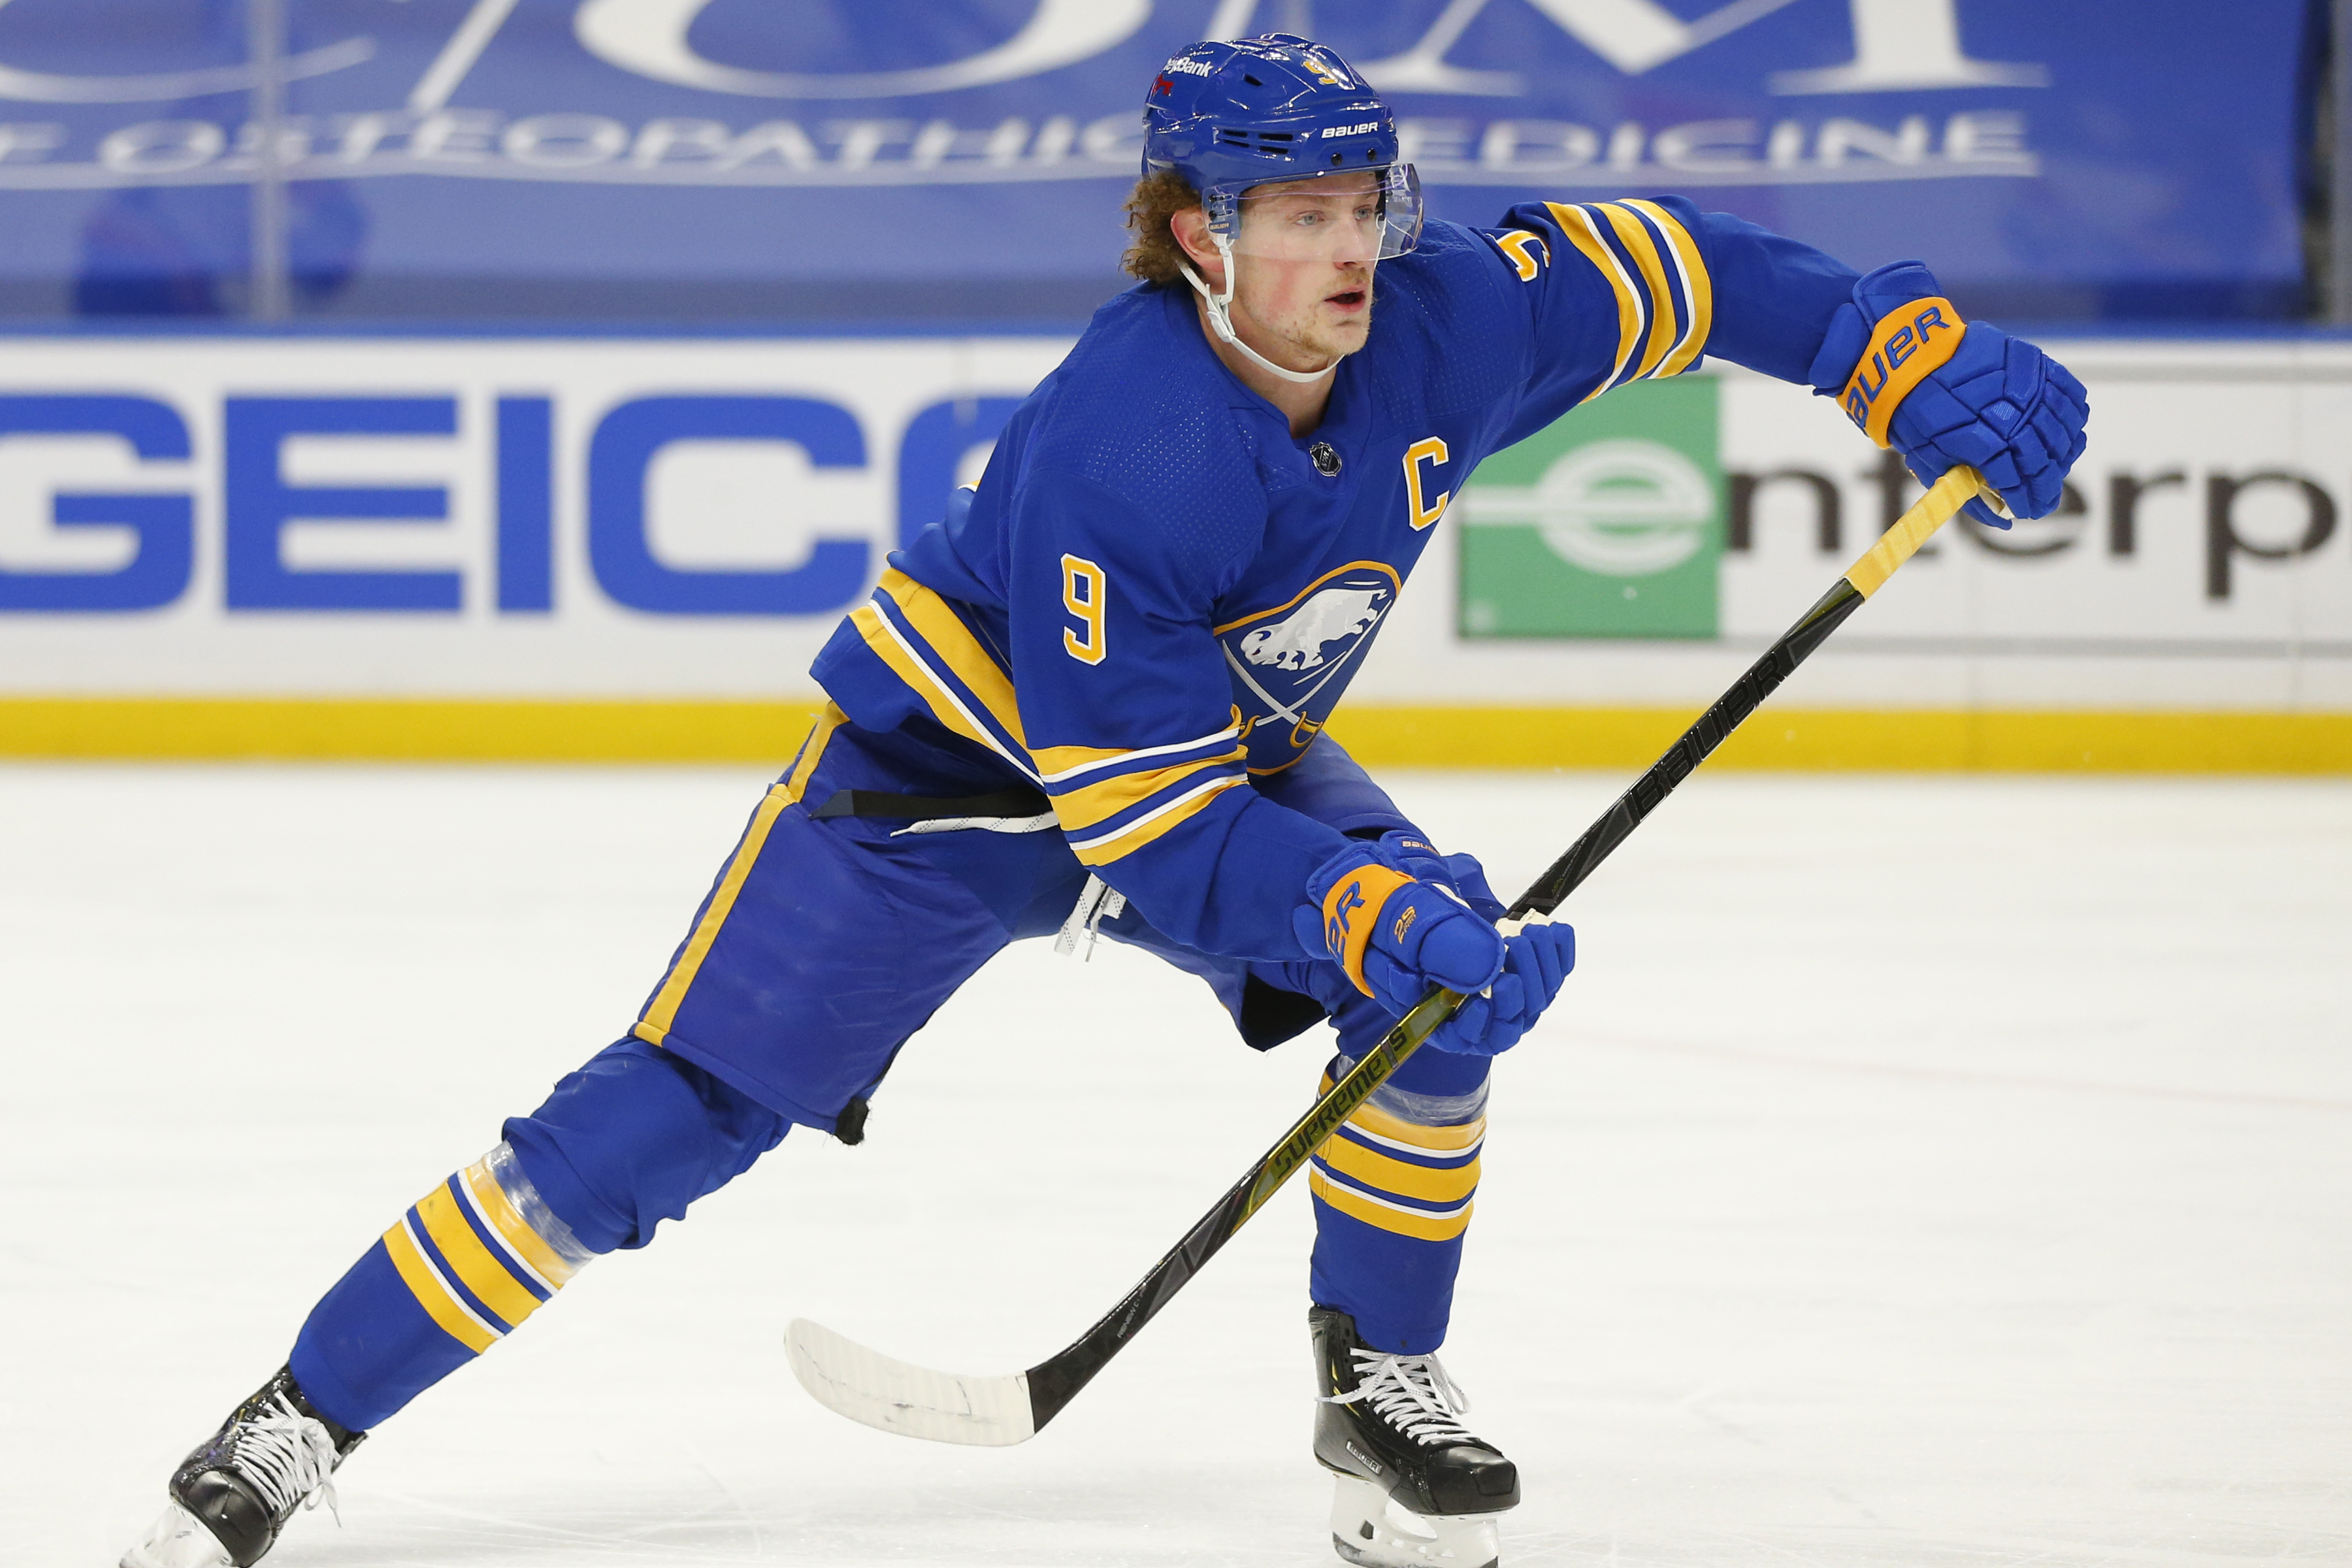 Jack Eichel's future in Buffalo continues to look bleak.